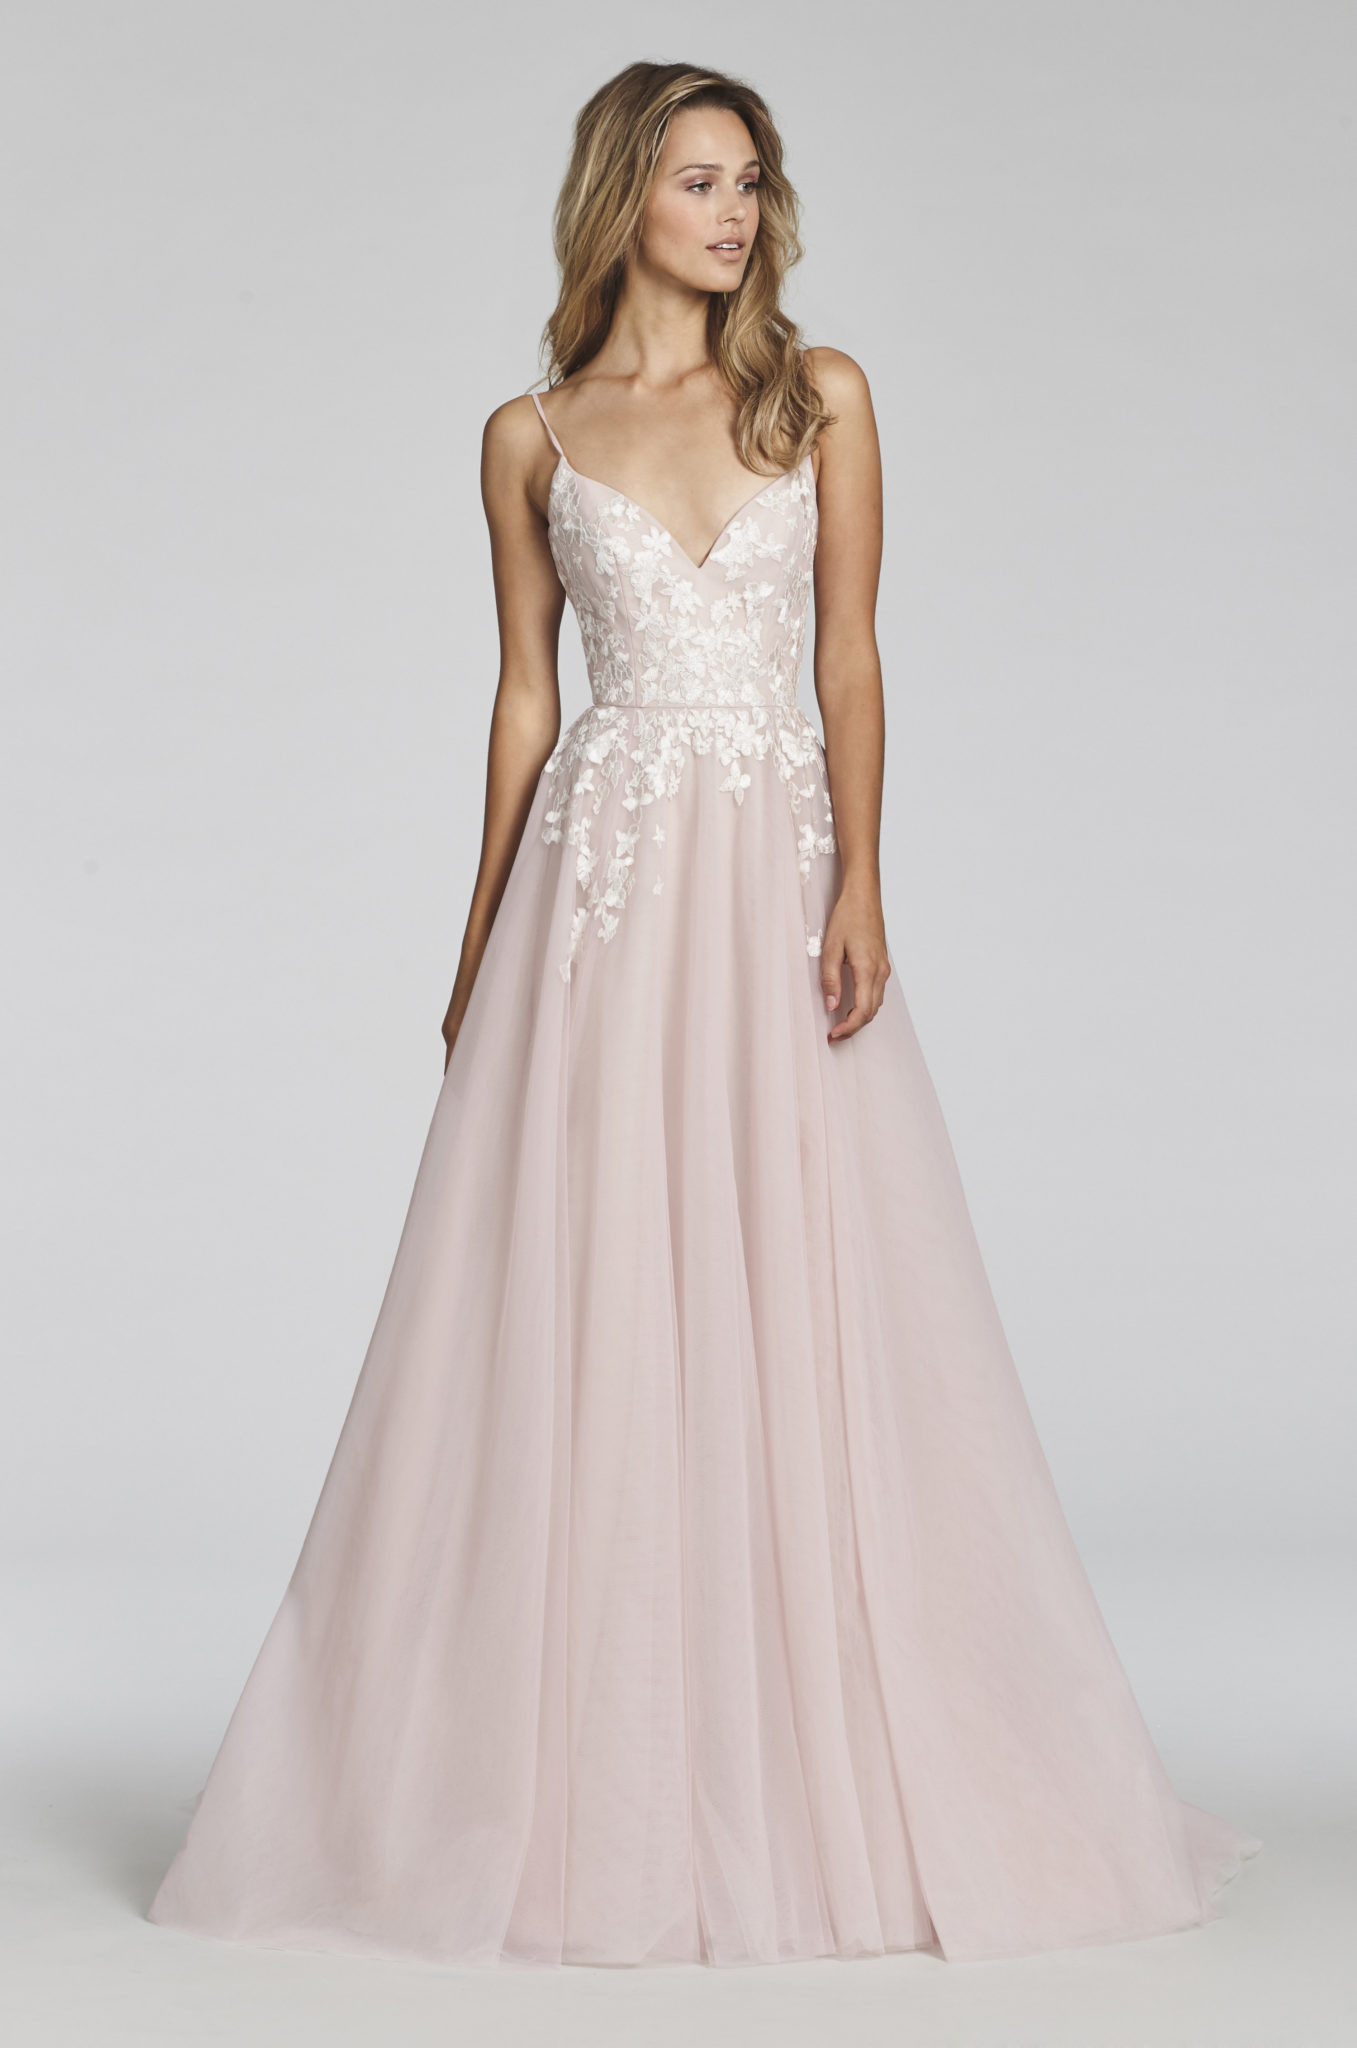 Blush Pink Wedding Dresses
 Blushing Brides 10 Gowns That Will Make You Want a Blush